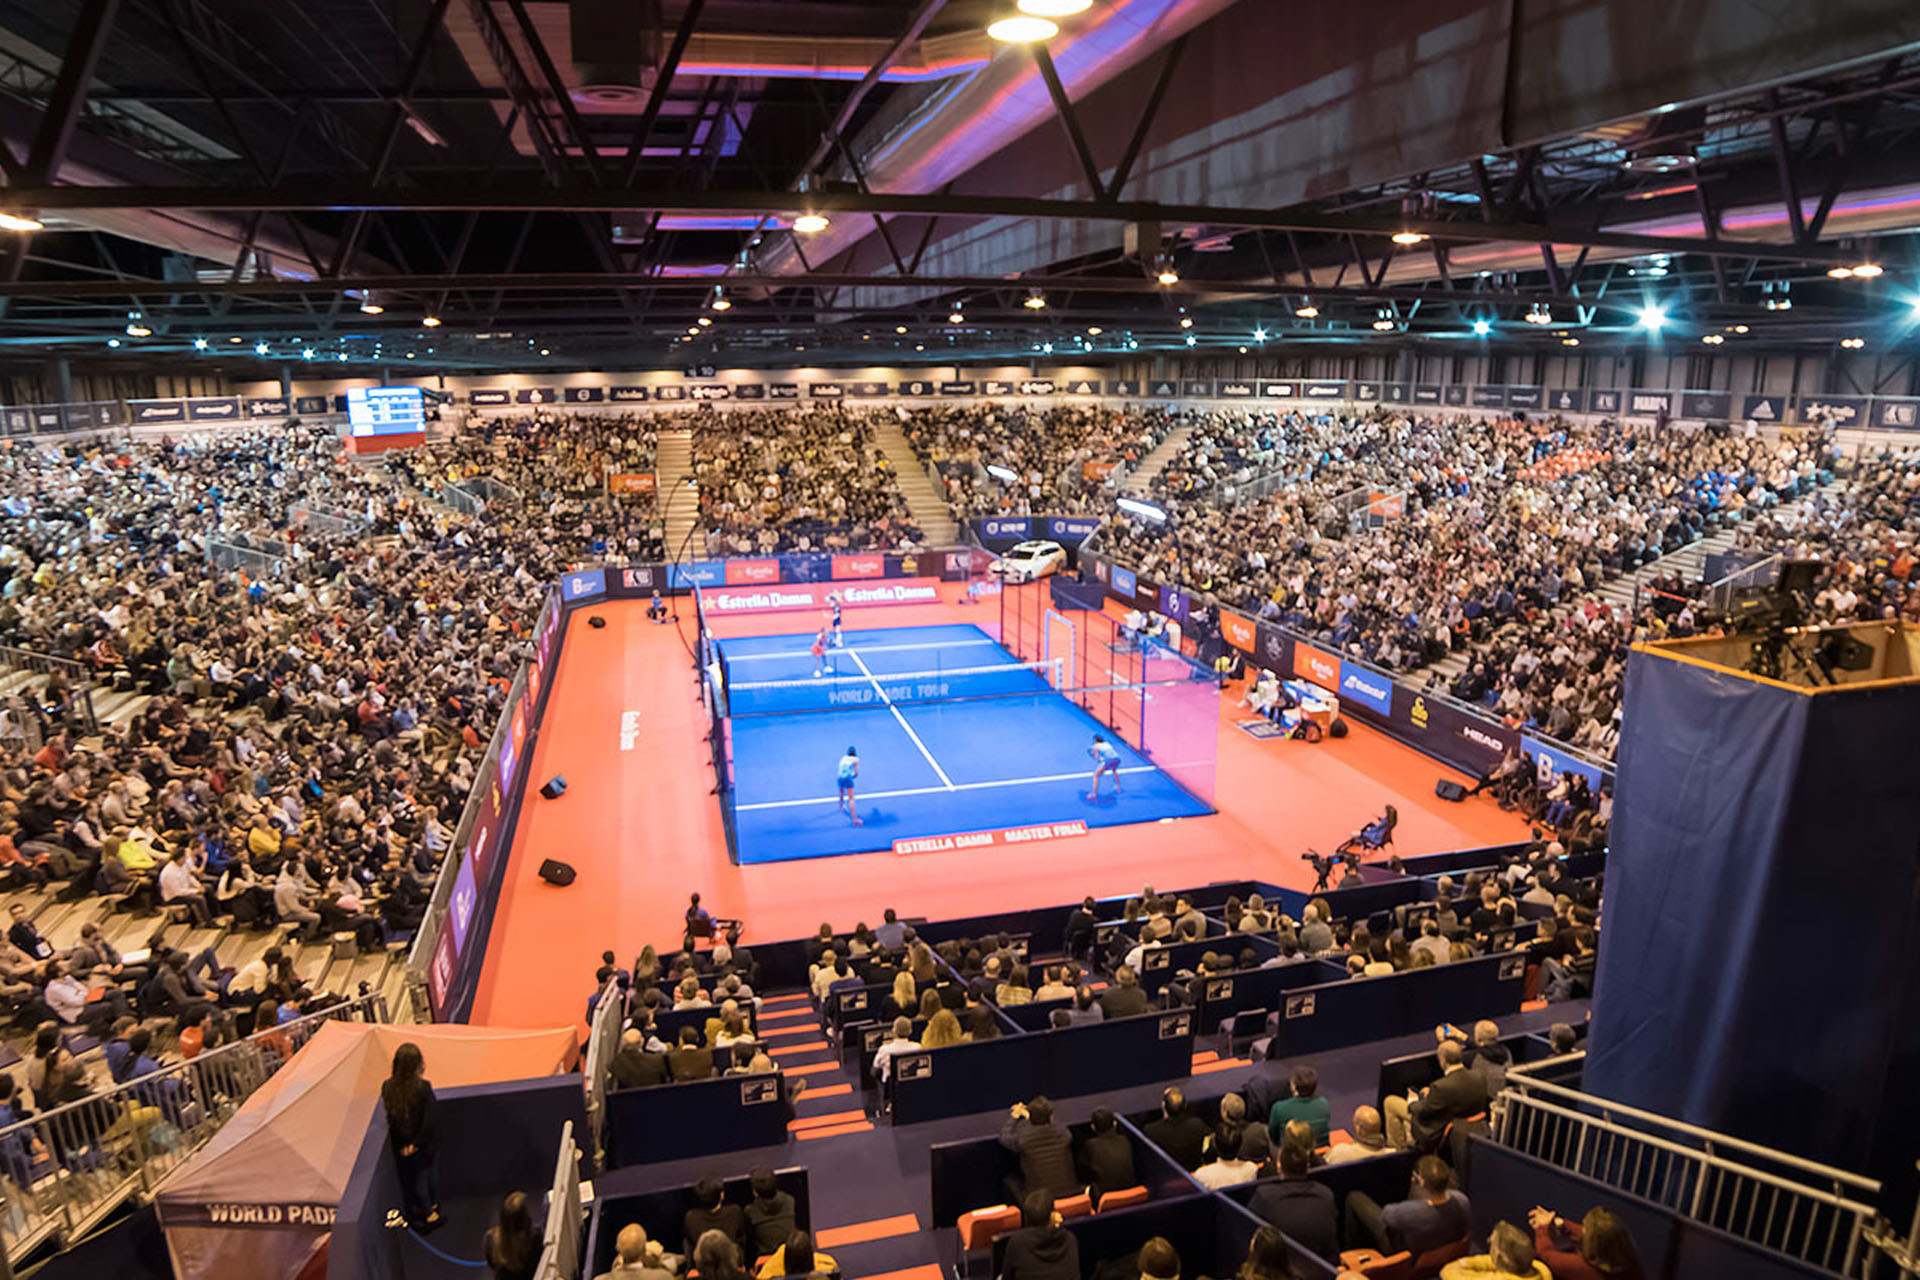 The World Padel Tour is bankrolled by Qatar Sports Investment and the success of the sport has attracted the unwanted attention of the International Tennis Federation ©World Padel Tour